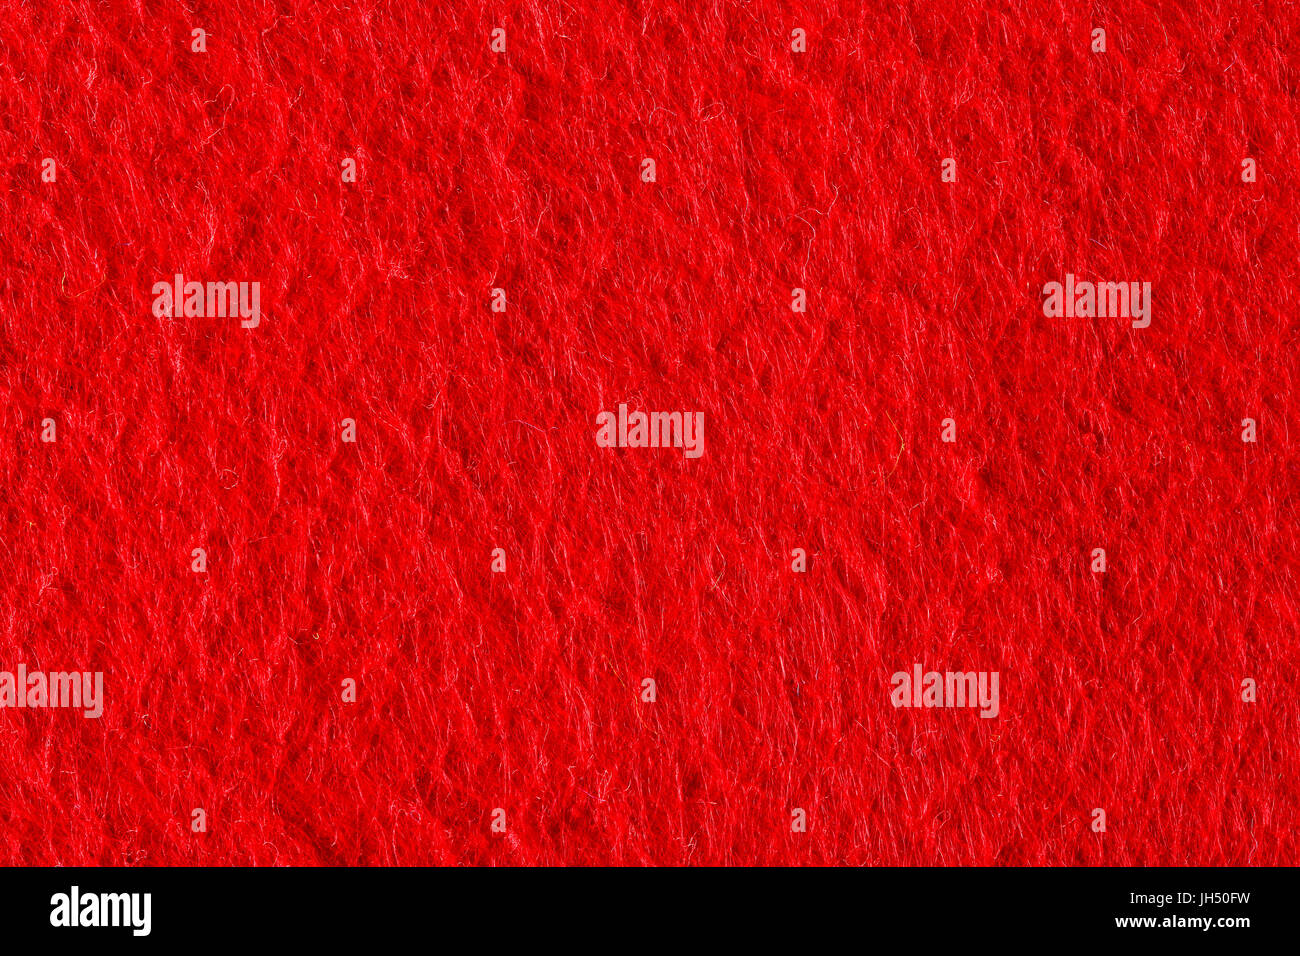 Abstract background with red felt texture, velvet fabric. Stock Photo